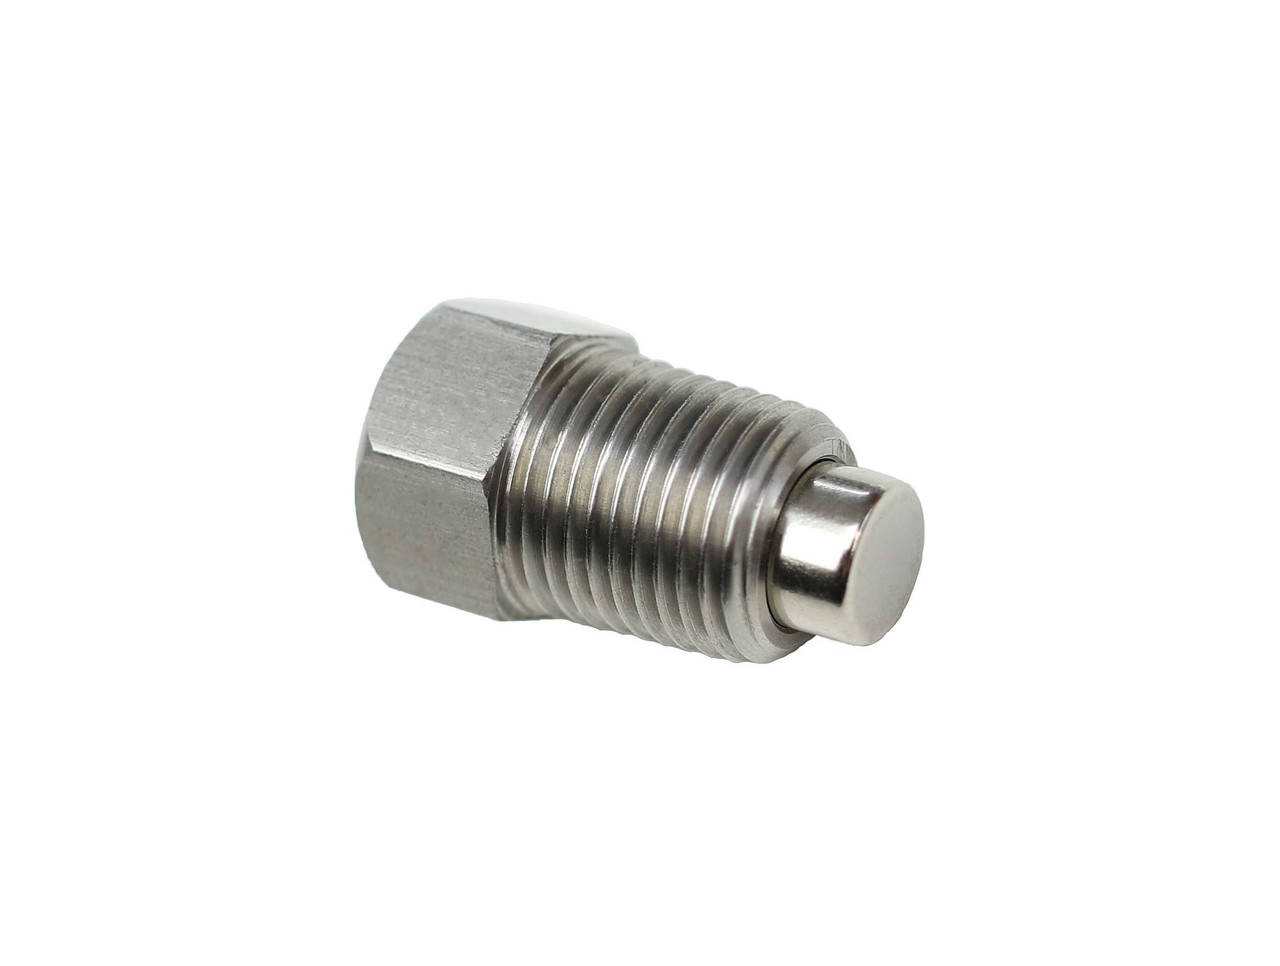 502455 for Harley Davidson - Stainless Steel Magnetic Oil Drain Plug with Neodymium Magnet - Made In USA